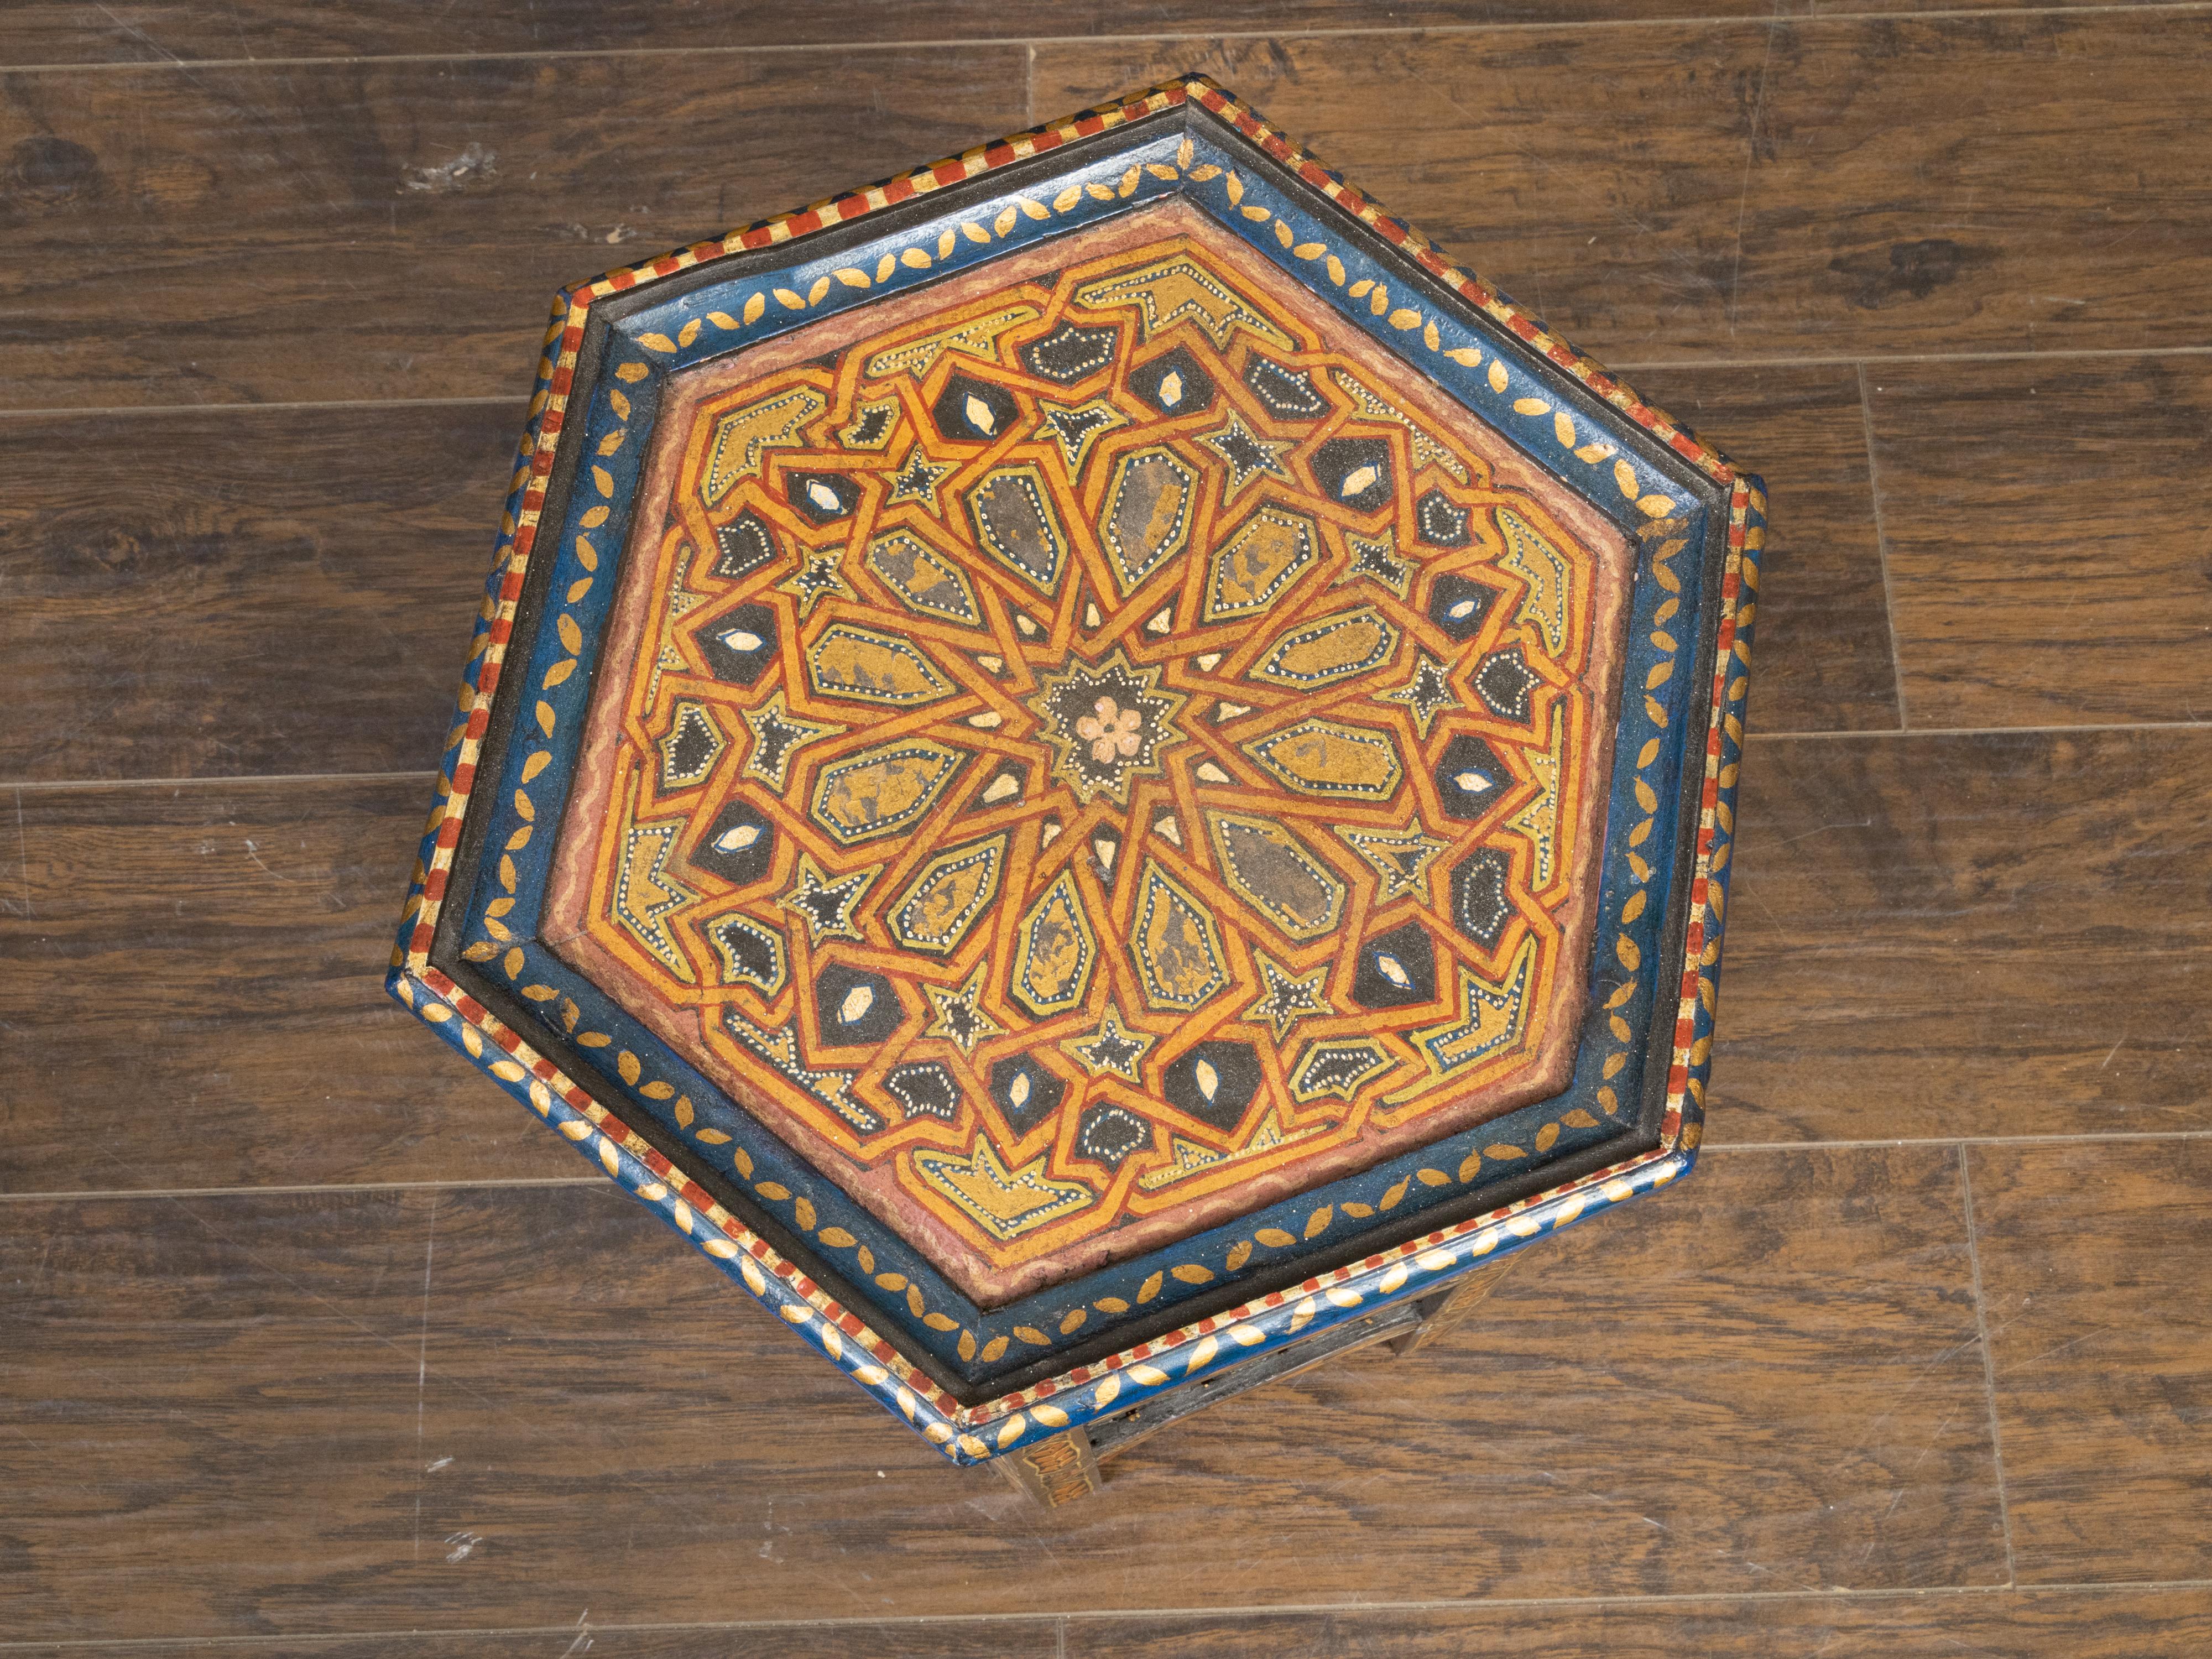 Wood Moorish Style Moroccan 1920s Table with Hexagonal Top and Polychrome Décor